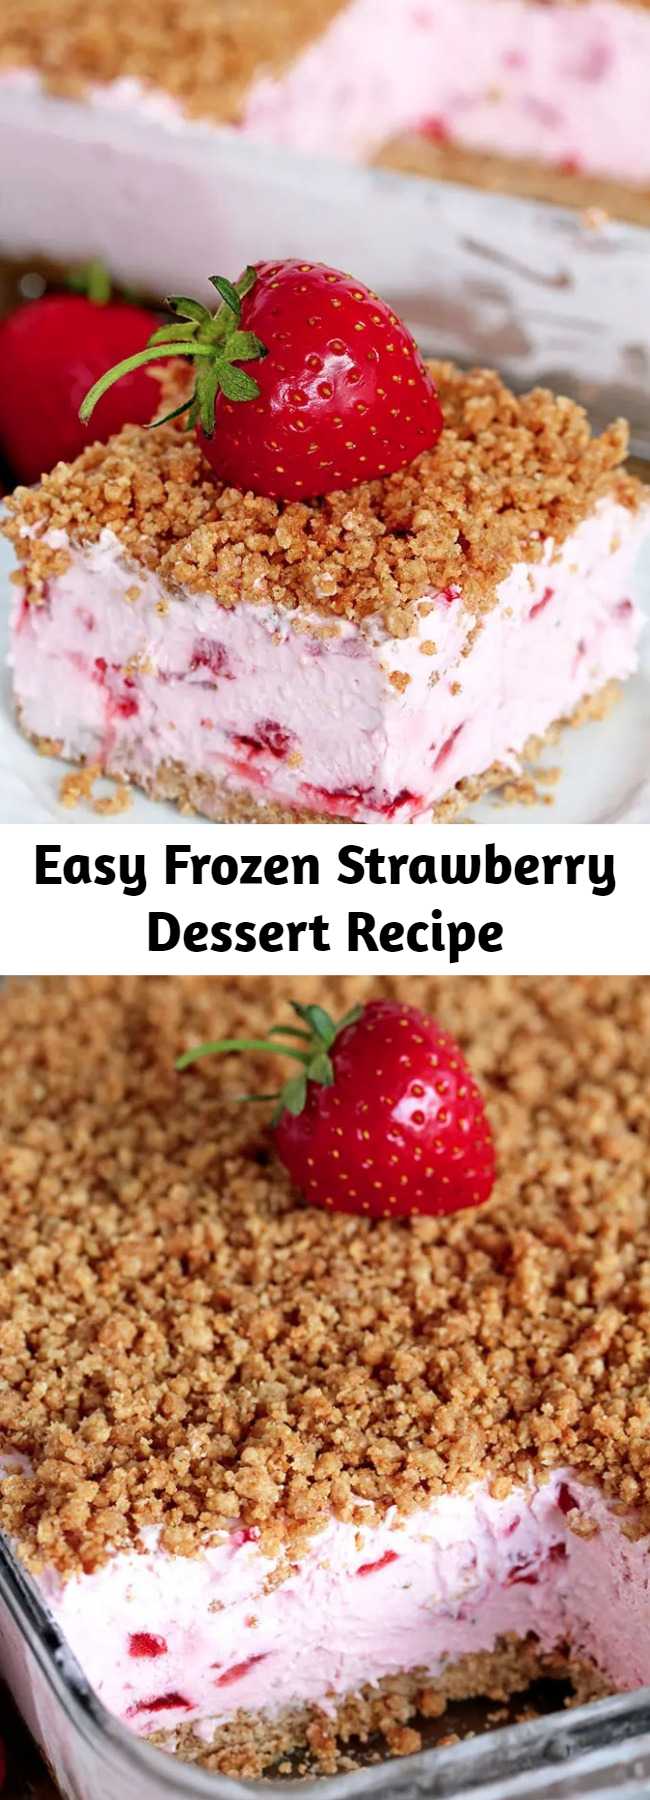 Easy Frozen Strawberry Dessert Recipe - Easy Frozen Strawberry Dessert a perfect spring and summer dessert for all strawberry fans. This refreshing, creamy, frozen dessert made with fresh strawberries and a crunchy graham cracker layer, topped with graham cracker crumbs is very quick and easy to prepare.